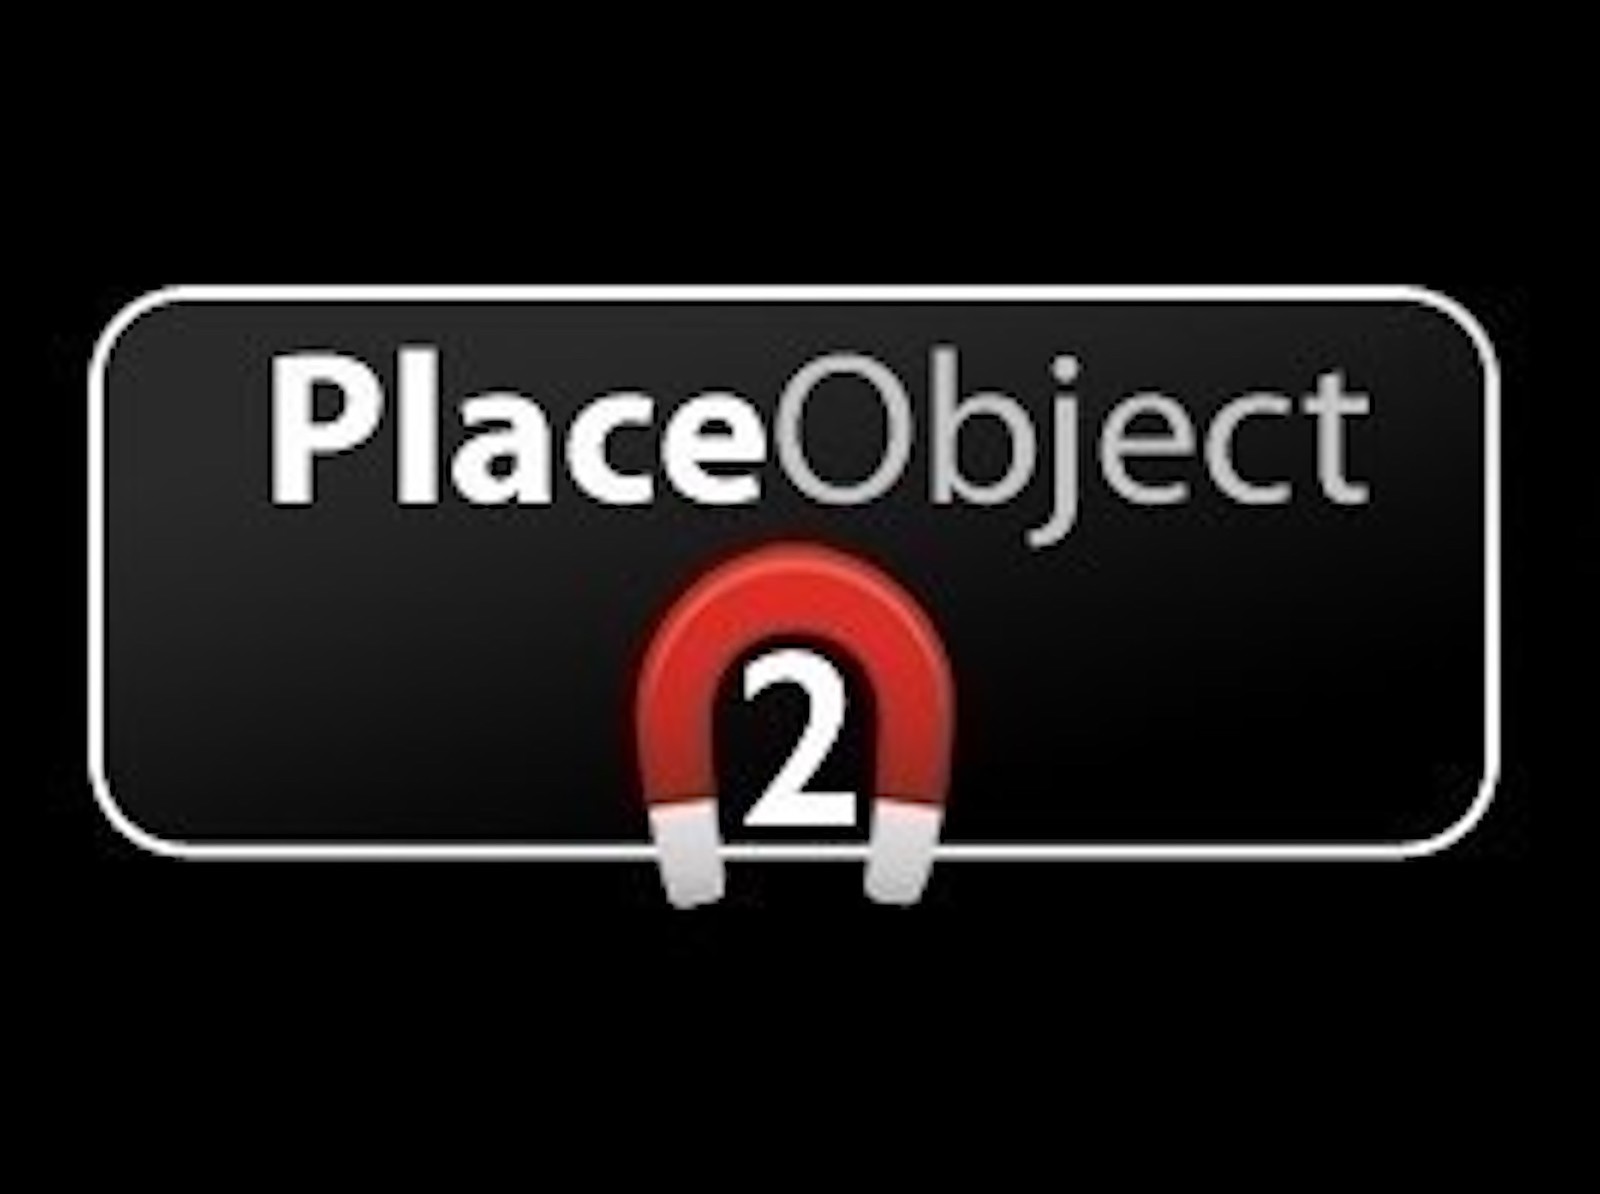 PlaceObject 2.1 free upgrade!